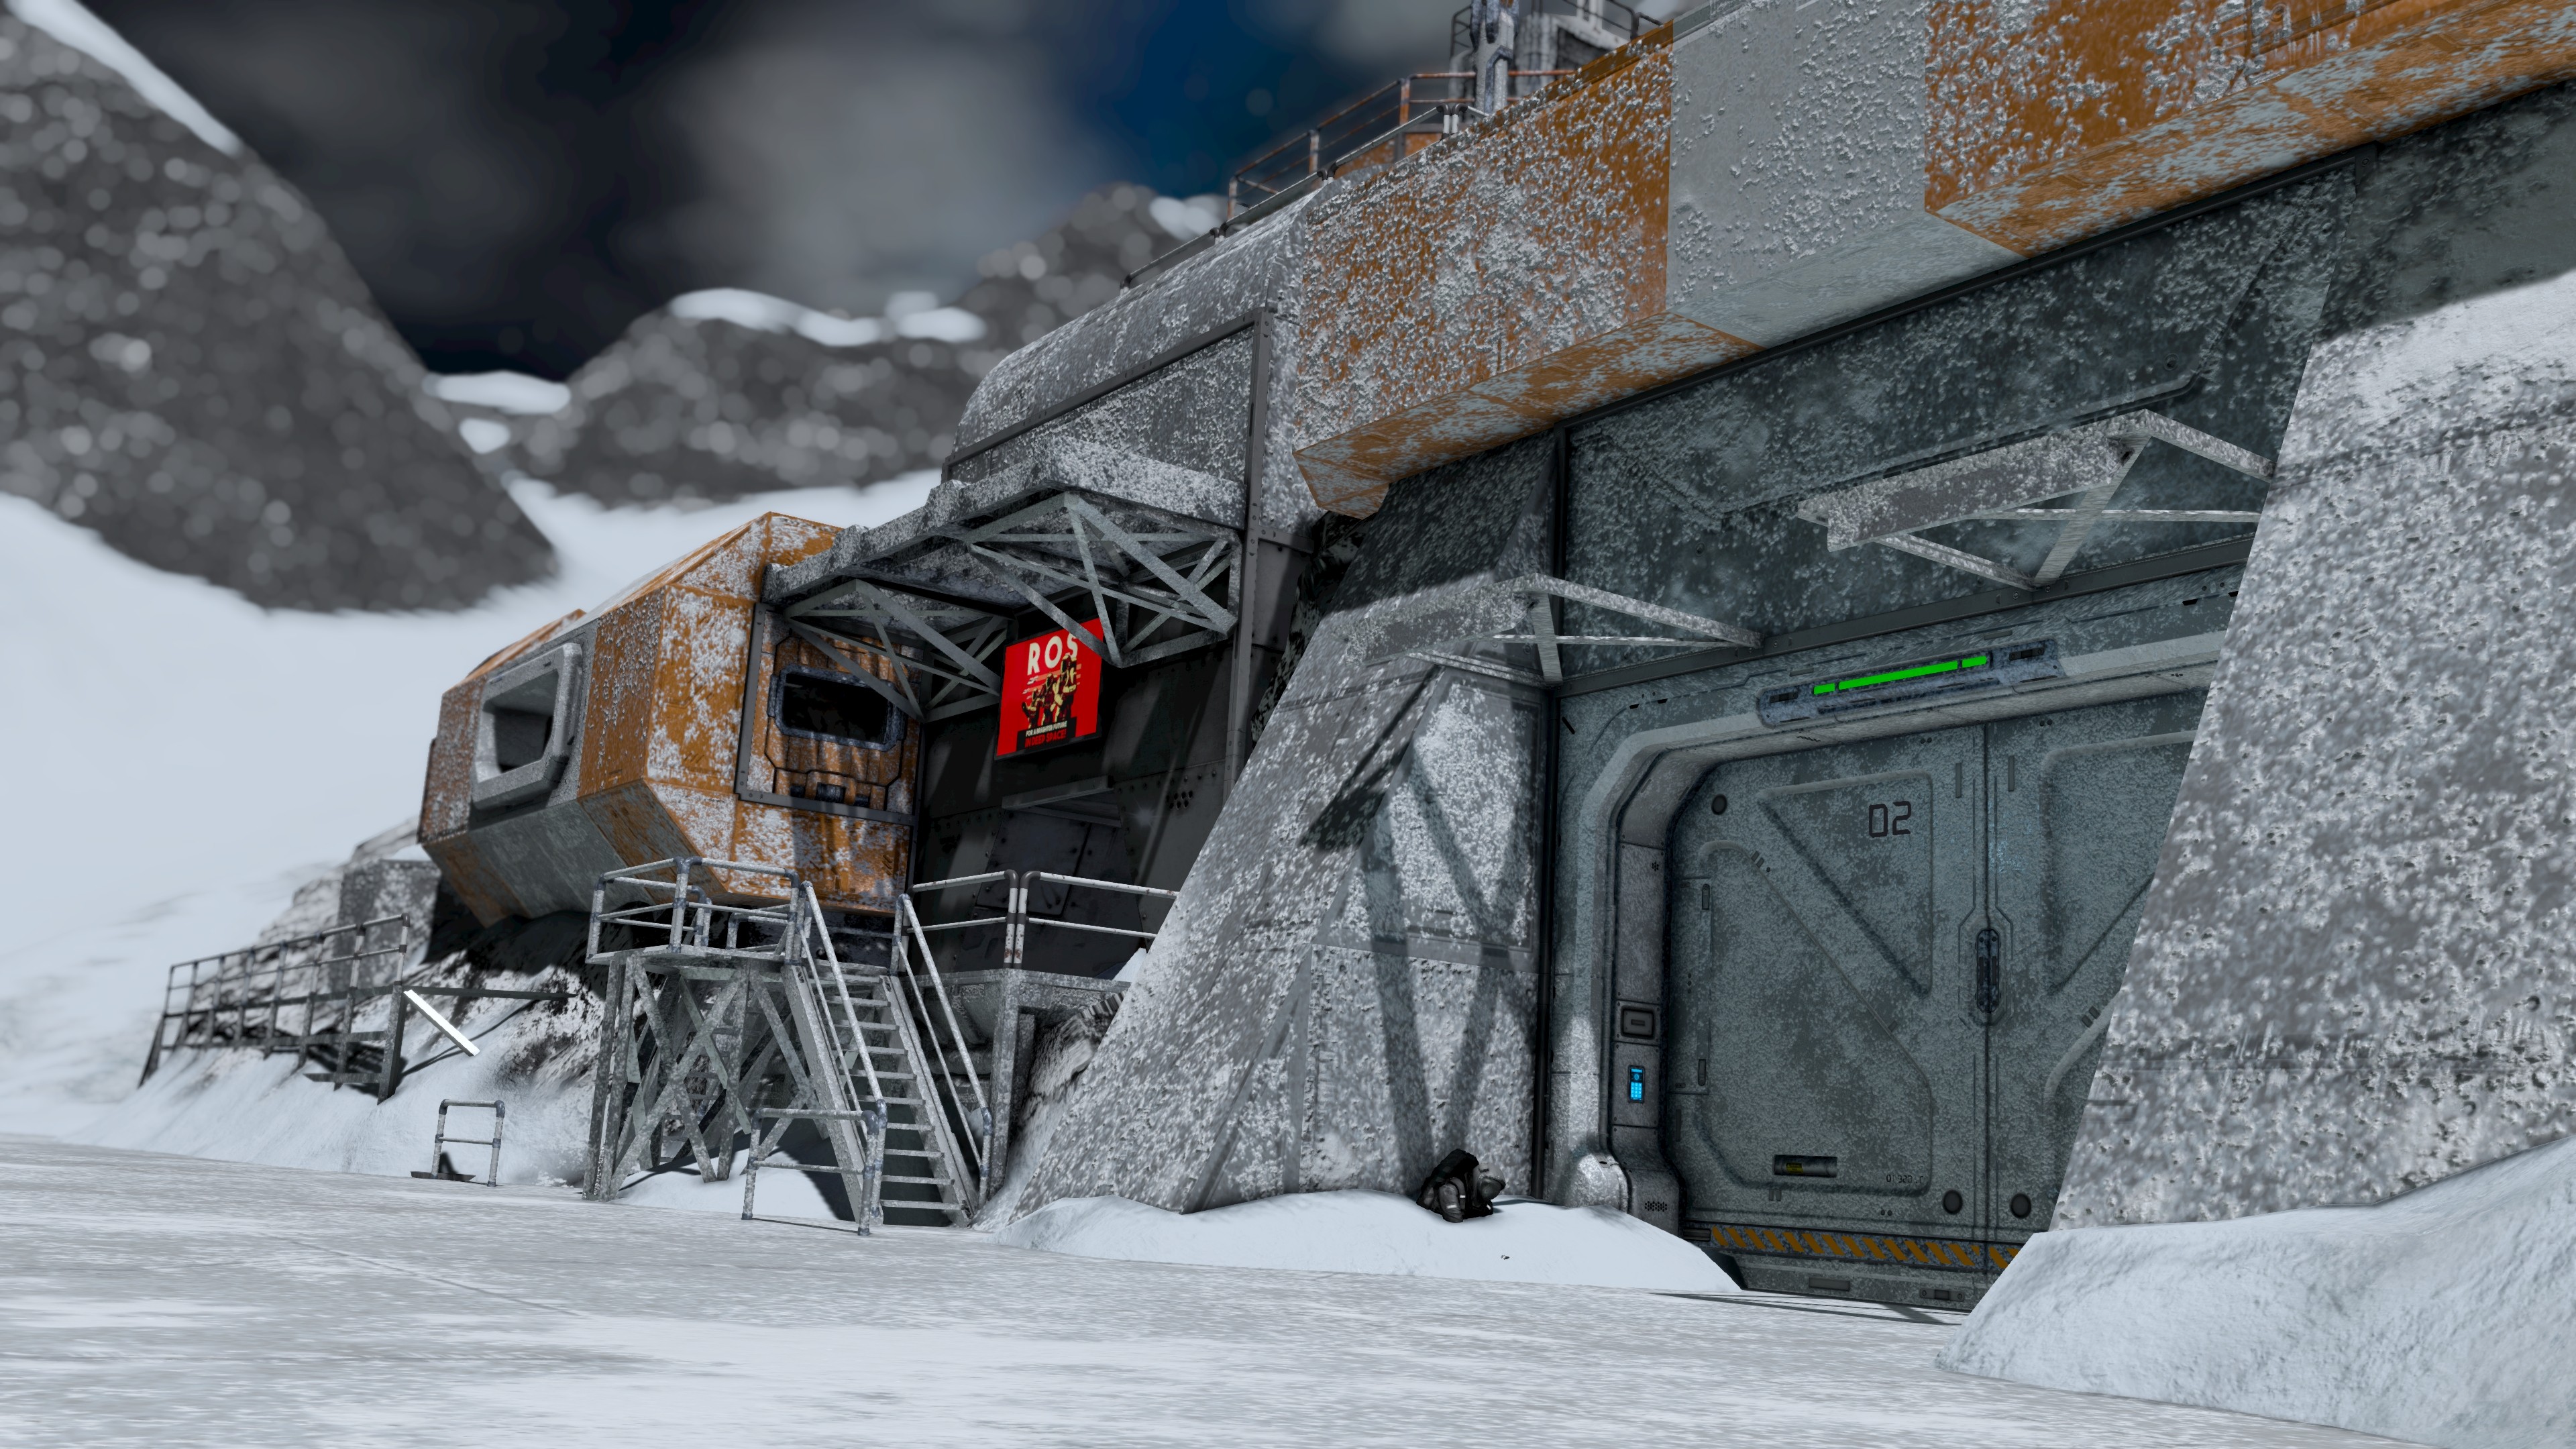 HD desktop wallpaper featuring a space engineer's outpost with a futuristic habitat built into a snowy mountain terrain.